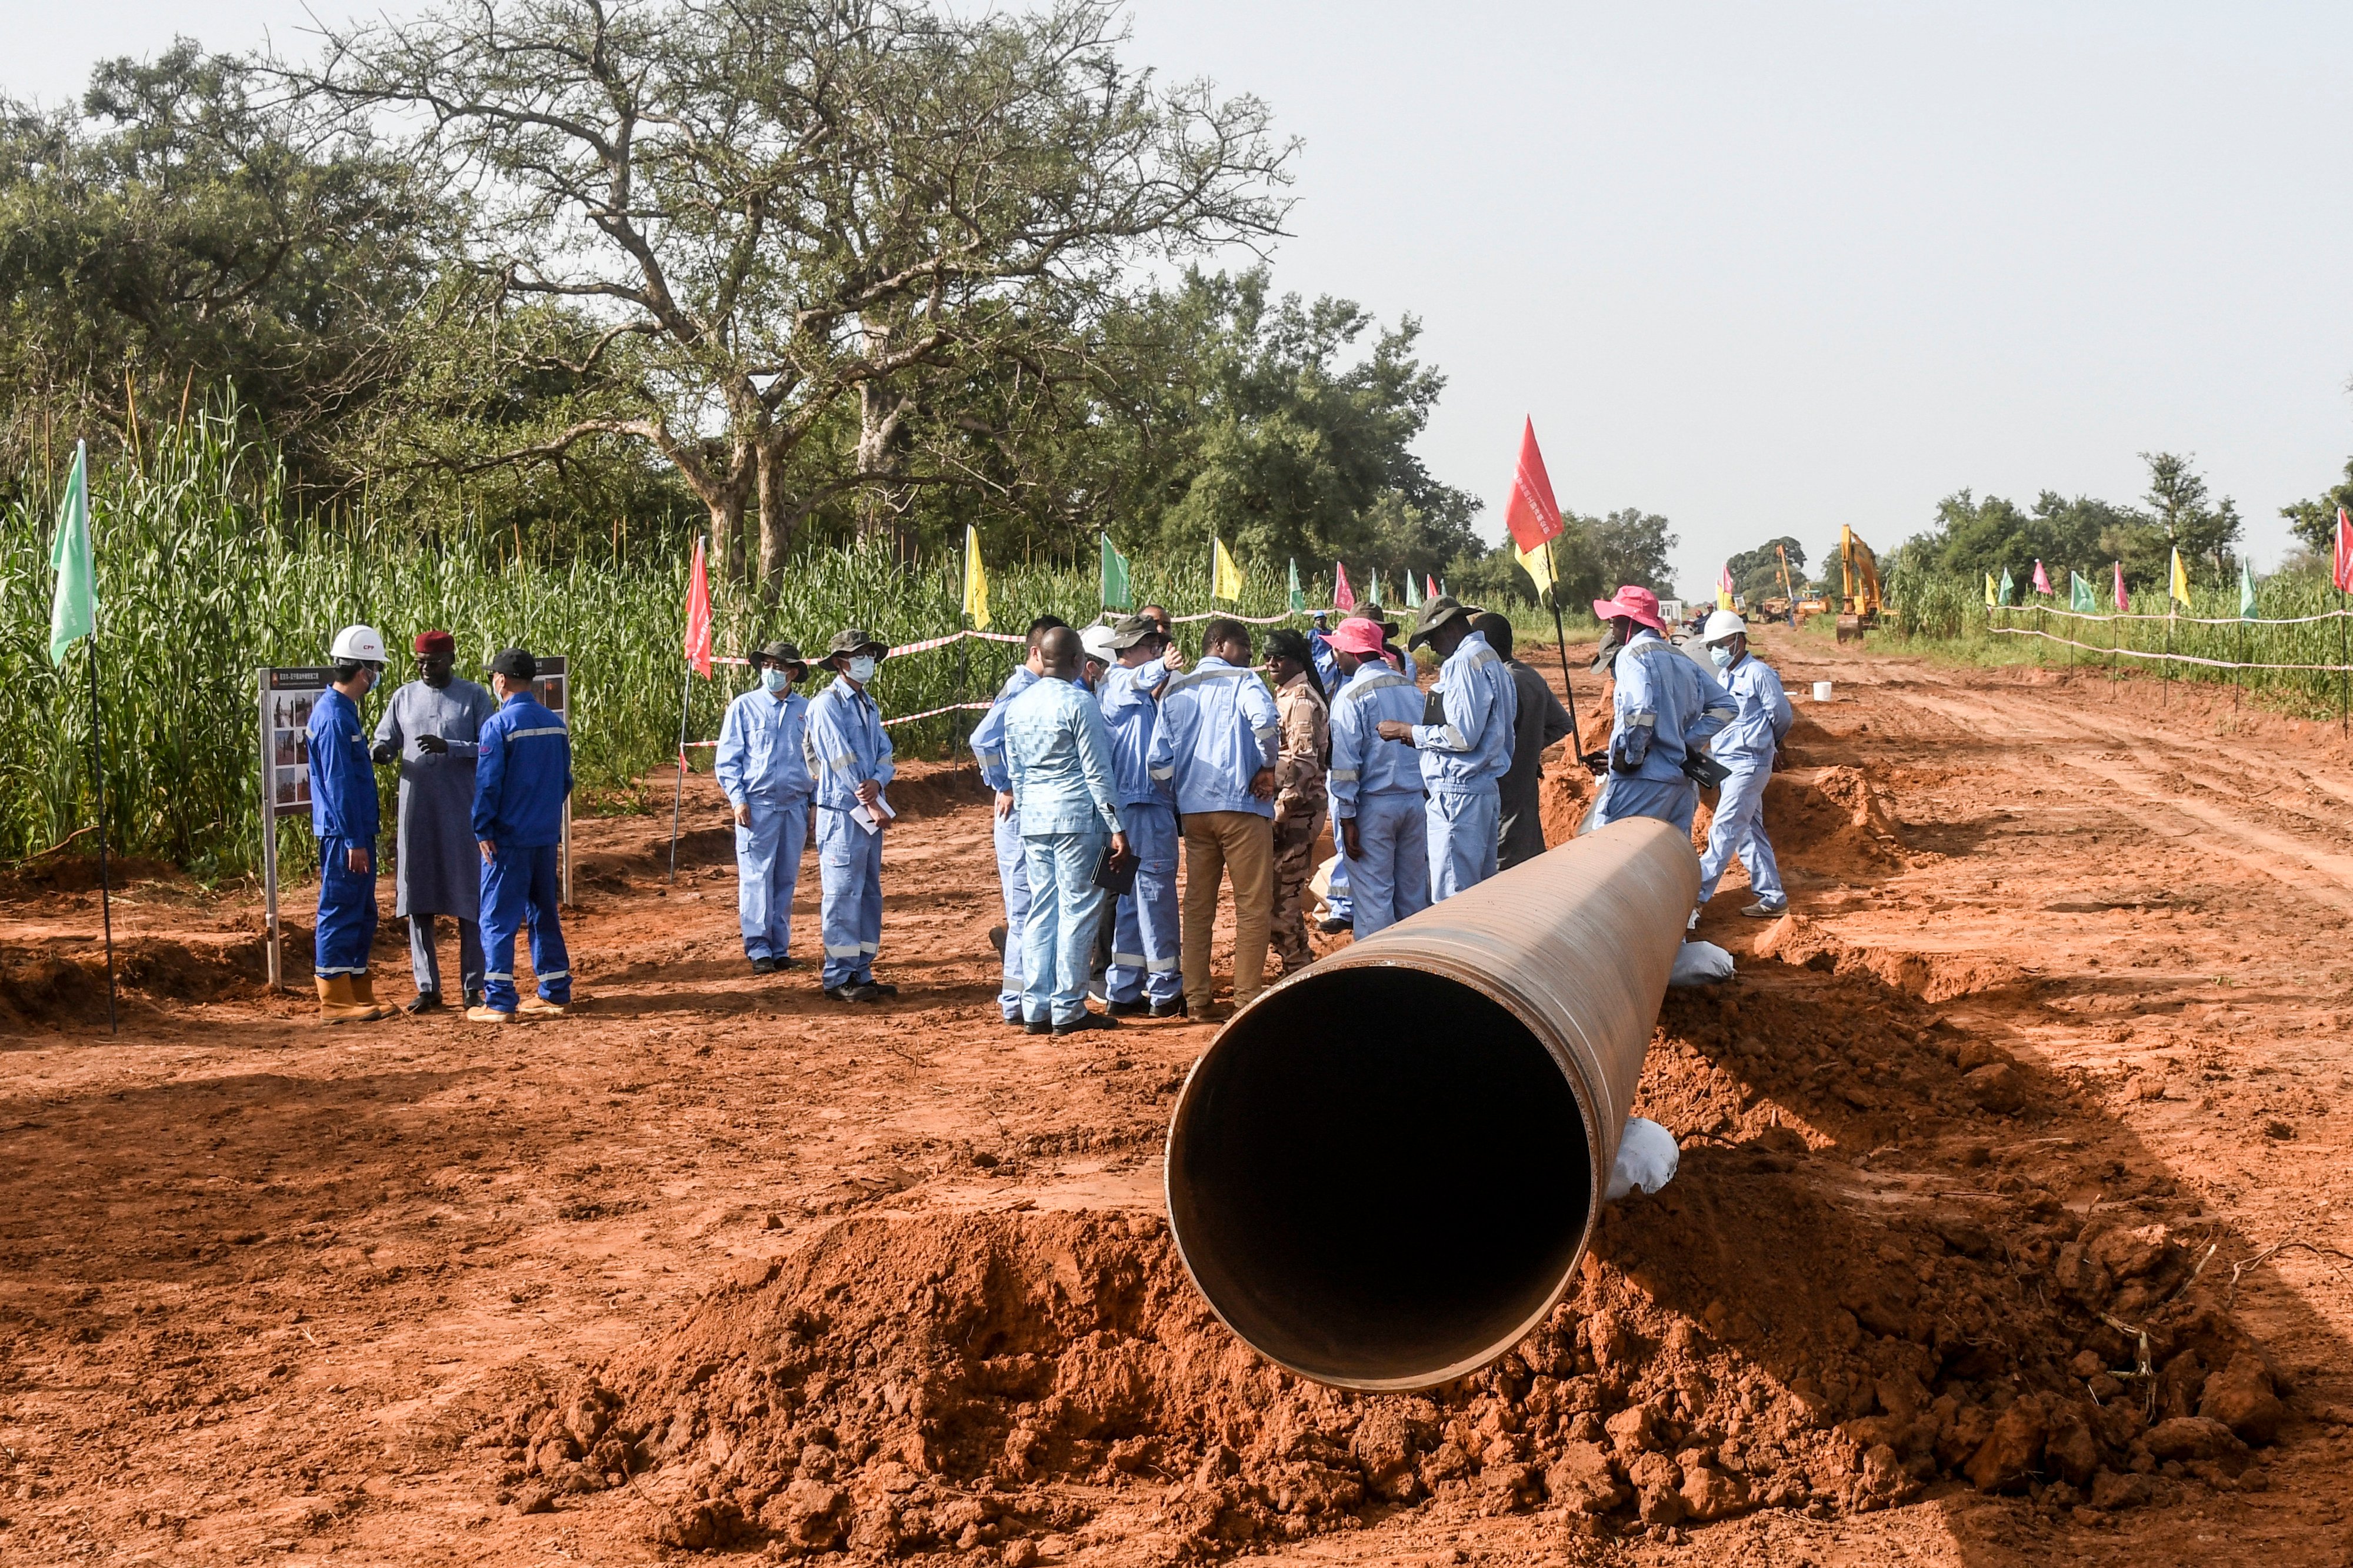 China has invested heavily in Niger’s oil infrastructure, including the building of pipelines. Photo: AFP